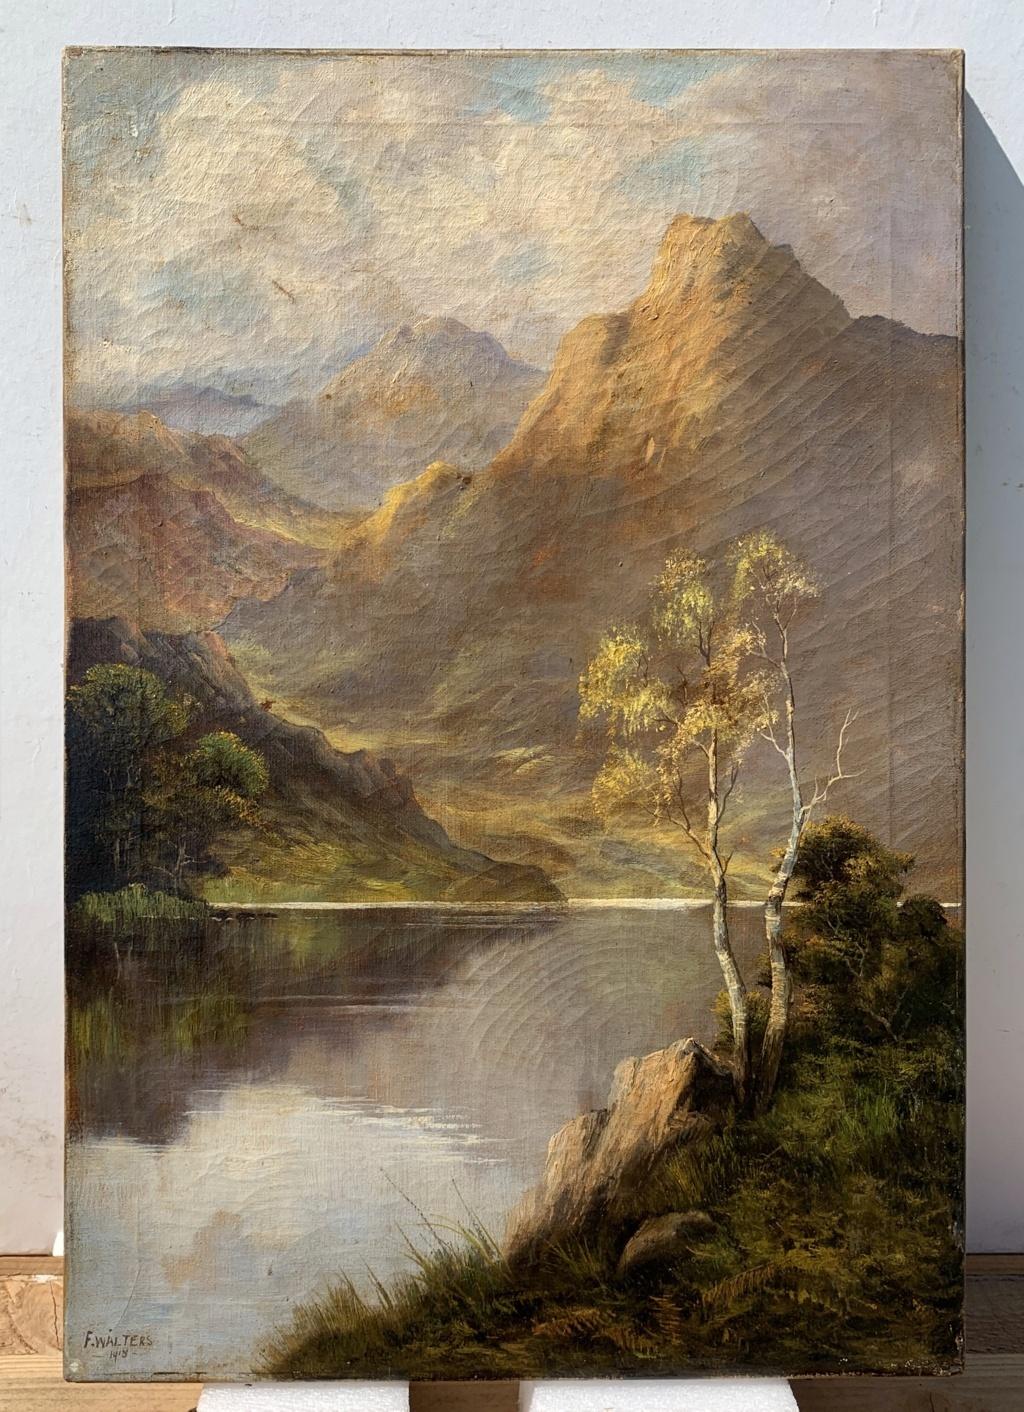 F. Walters - Pair of early 20th century British landscape paintings - Mountains For Sale 7